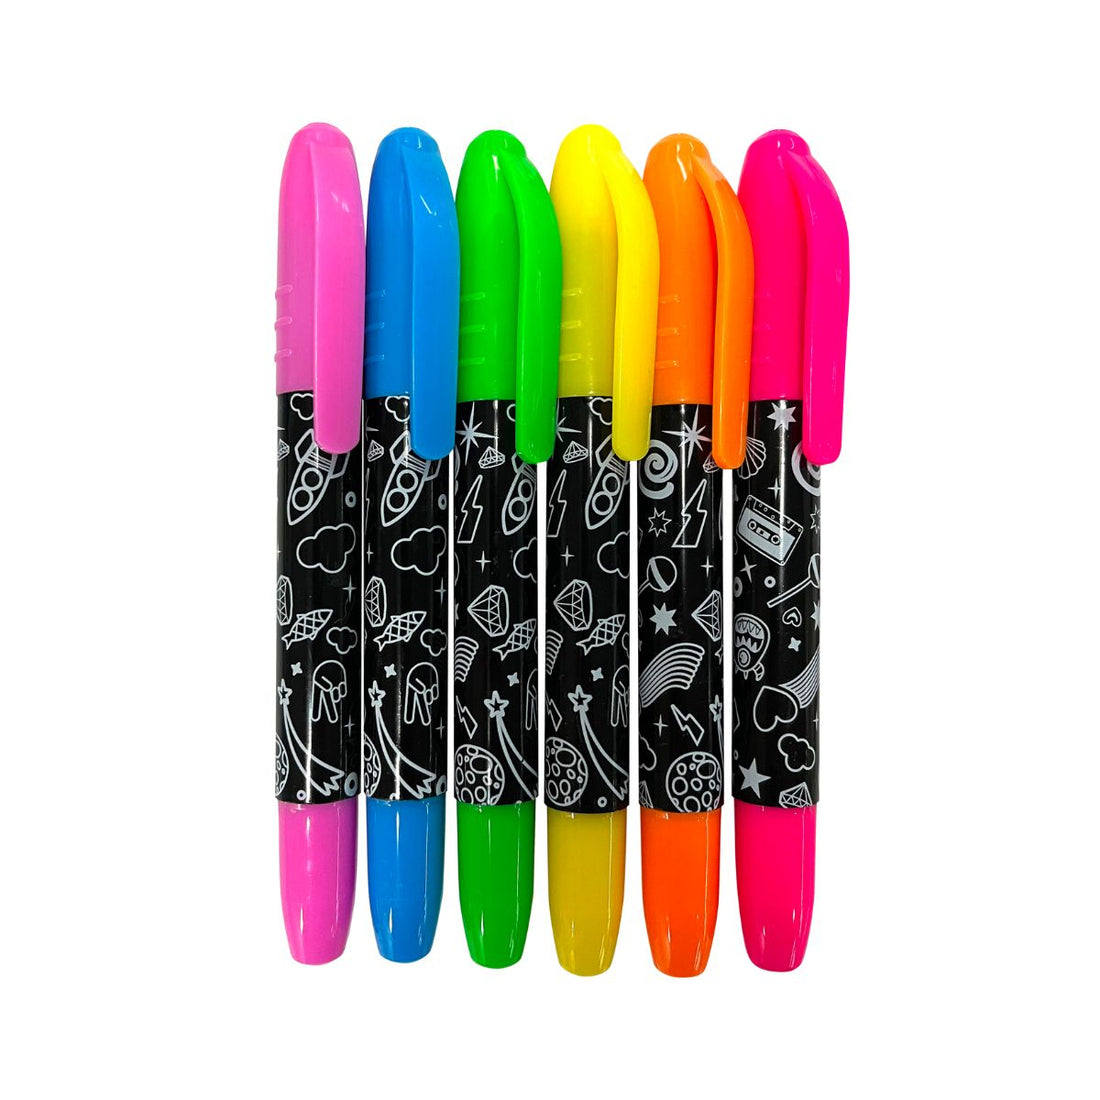 Kaleidoscope Electric Neon Markers - Pack Of 6